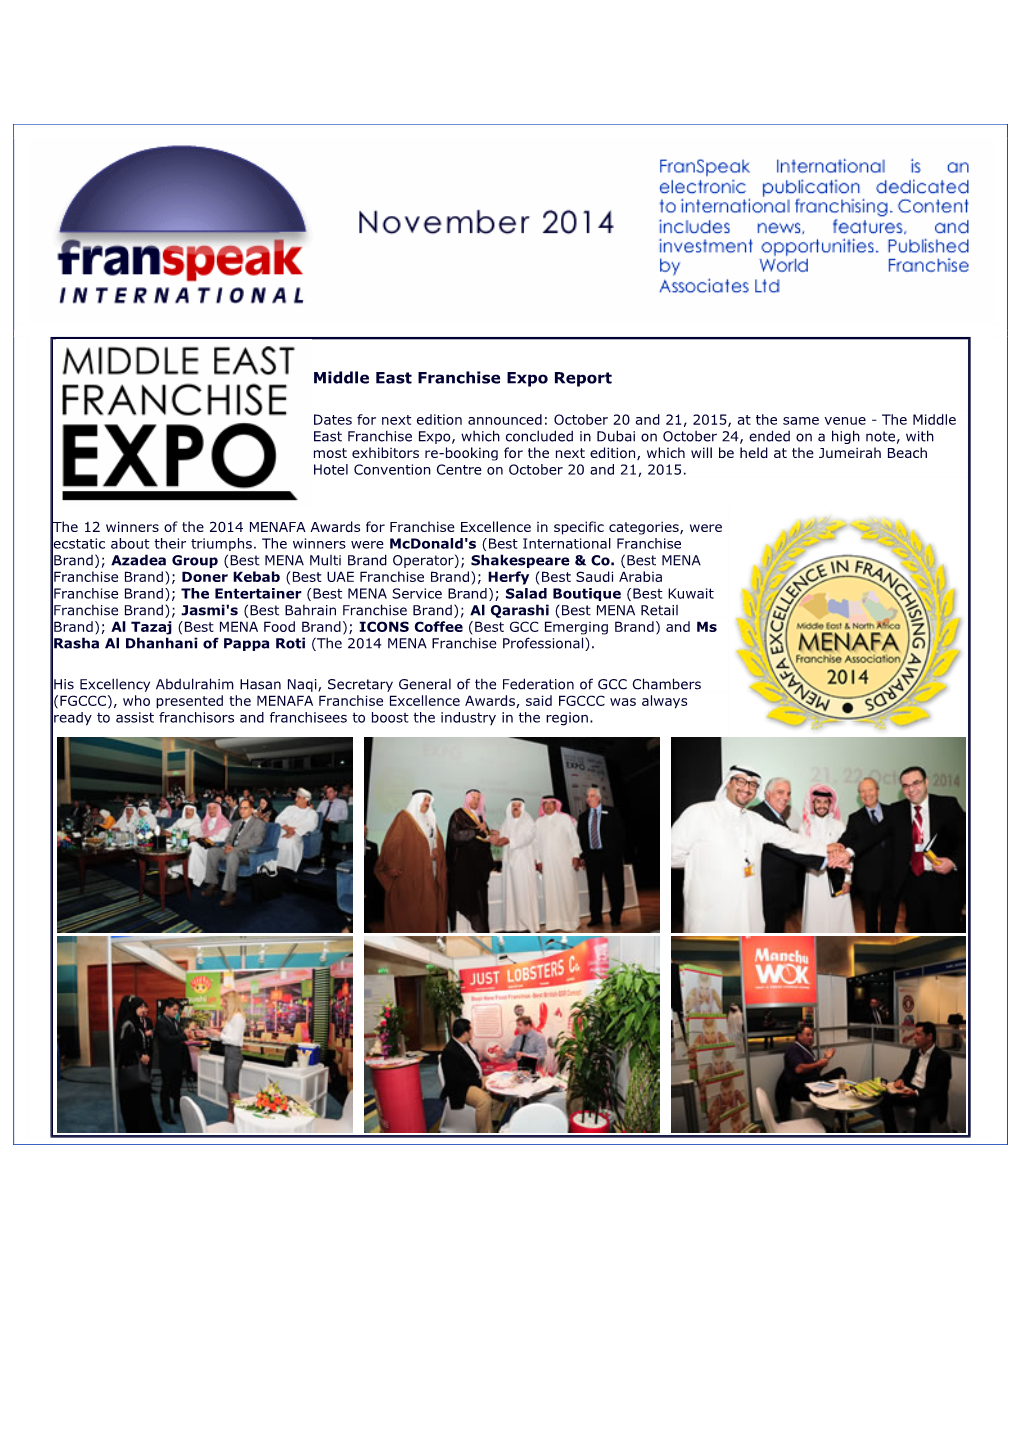 Middle East Franchise Expo Report